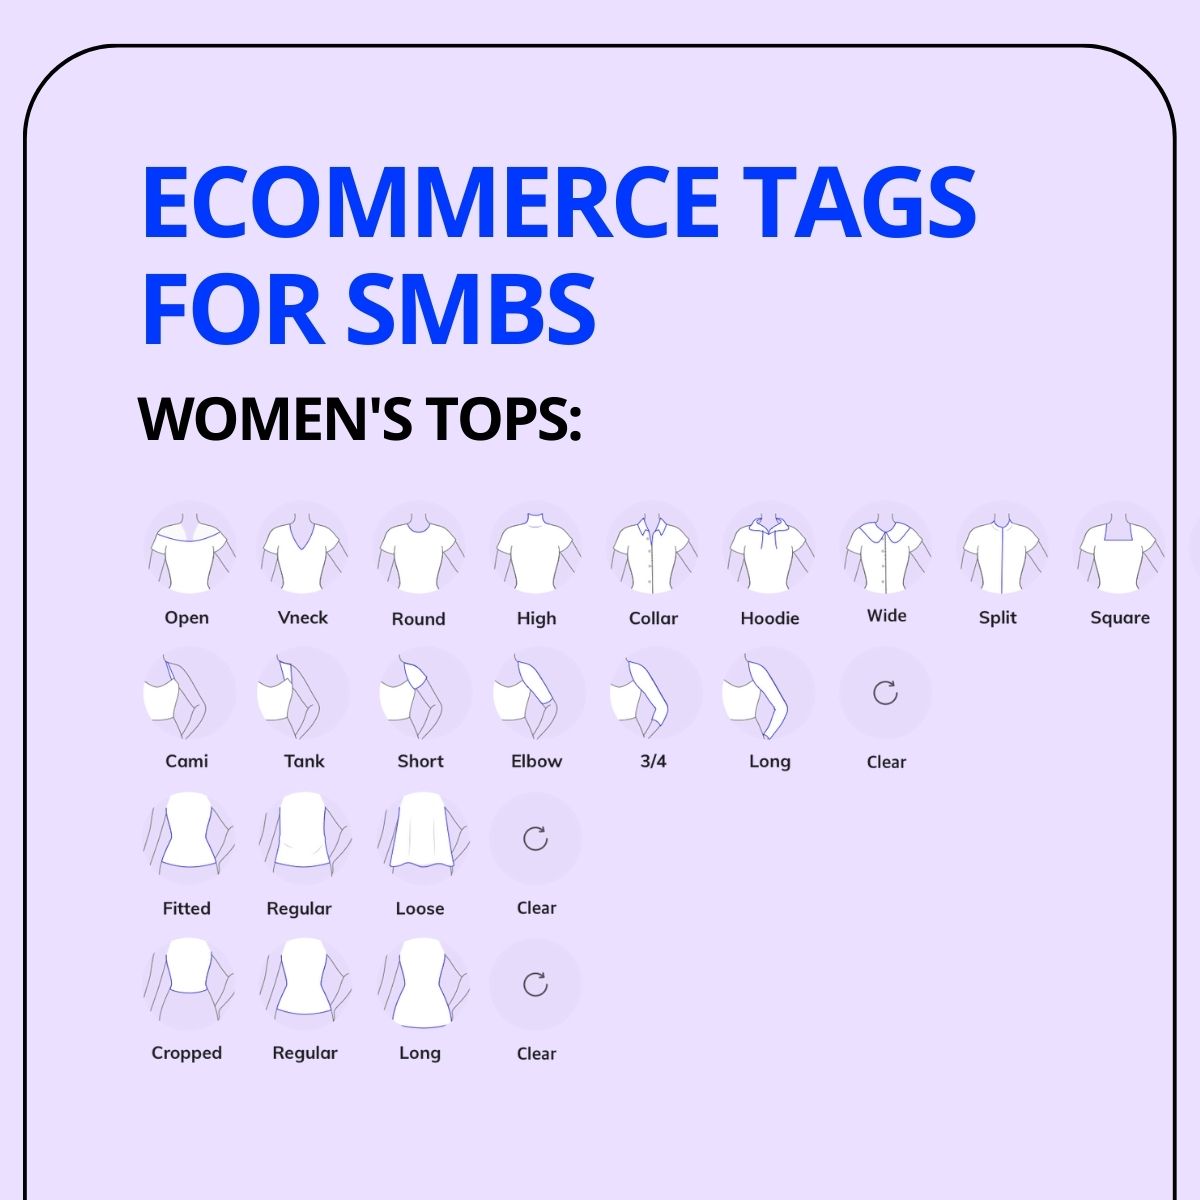 Ecommerce tagging for women's tops using fashion AI